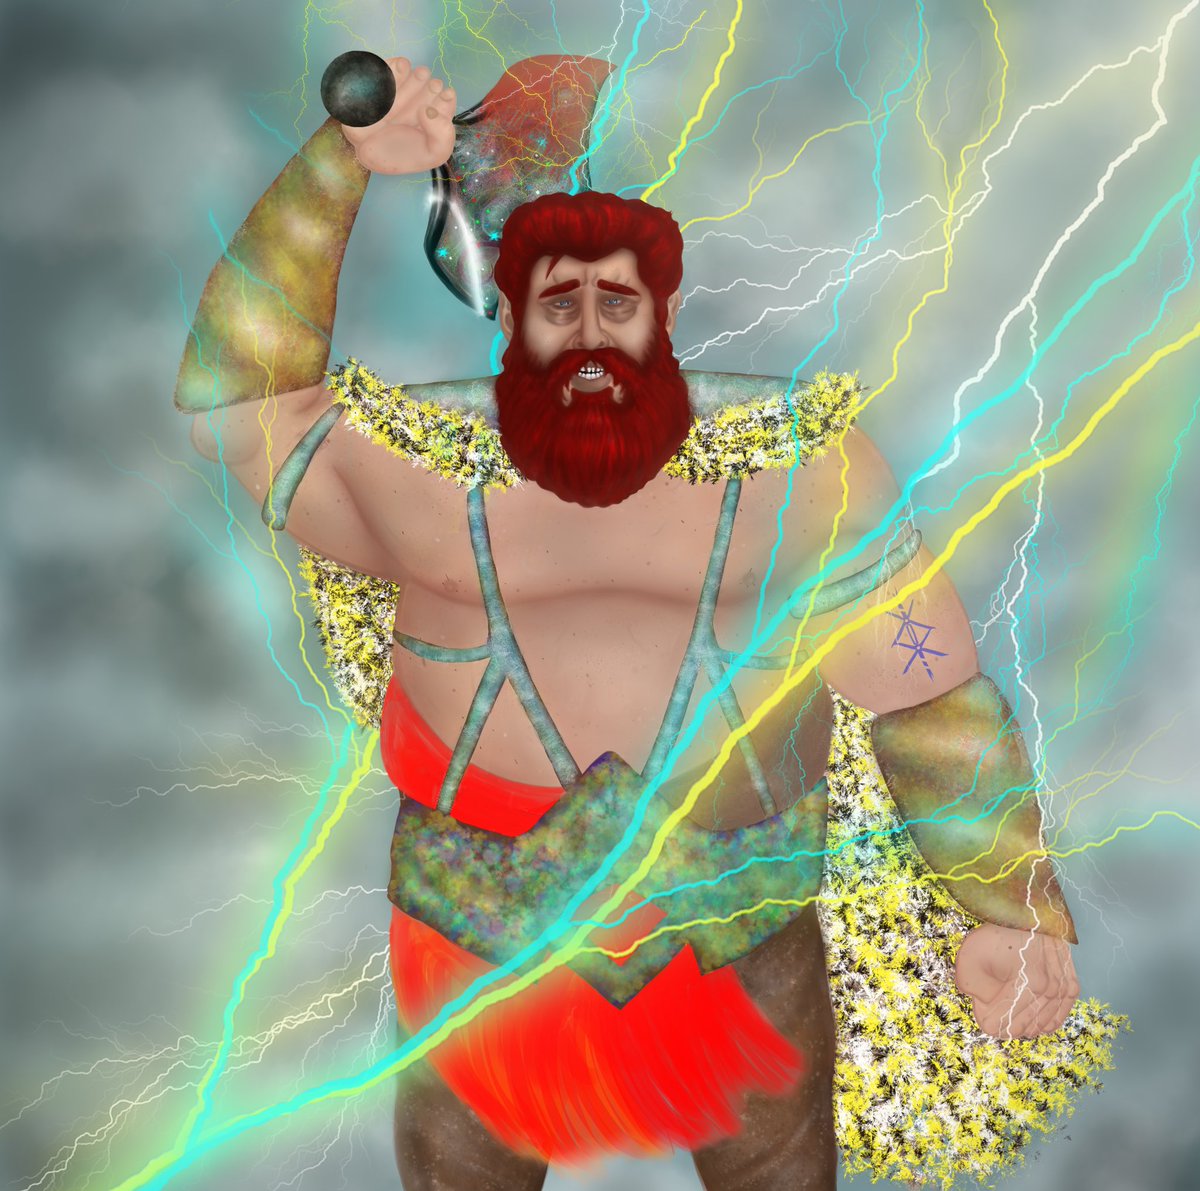 In Germanic and Skandinavian mythology, Thor from Old Norse is a hammer-wielding god associated with lightning, thunder, storms,strength, the protection of mankind, hallowing, and fertility. https://t.co/q8MBecQvfp #NFTSPACESHIP #NFTCommmunity #opensea #thor #nft #ETH https://t.co/tFGFRiwHzS